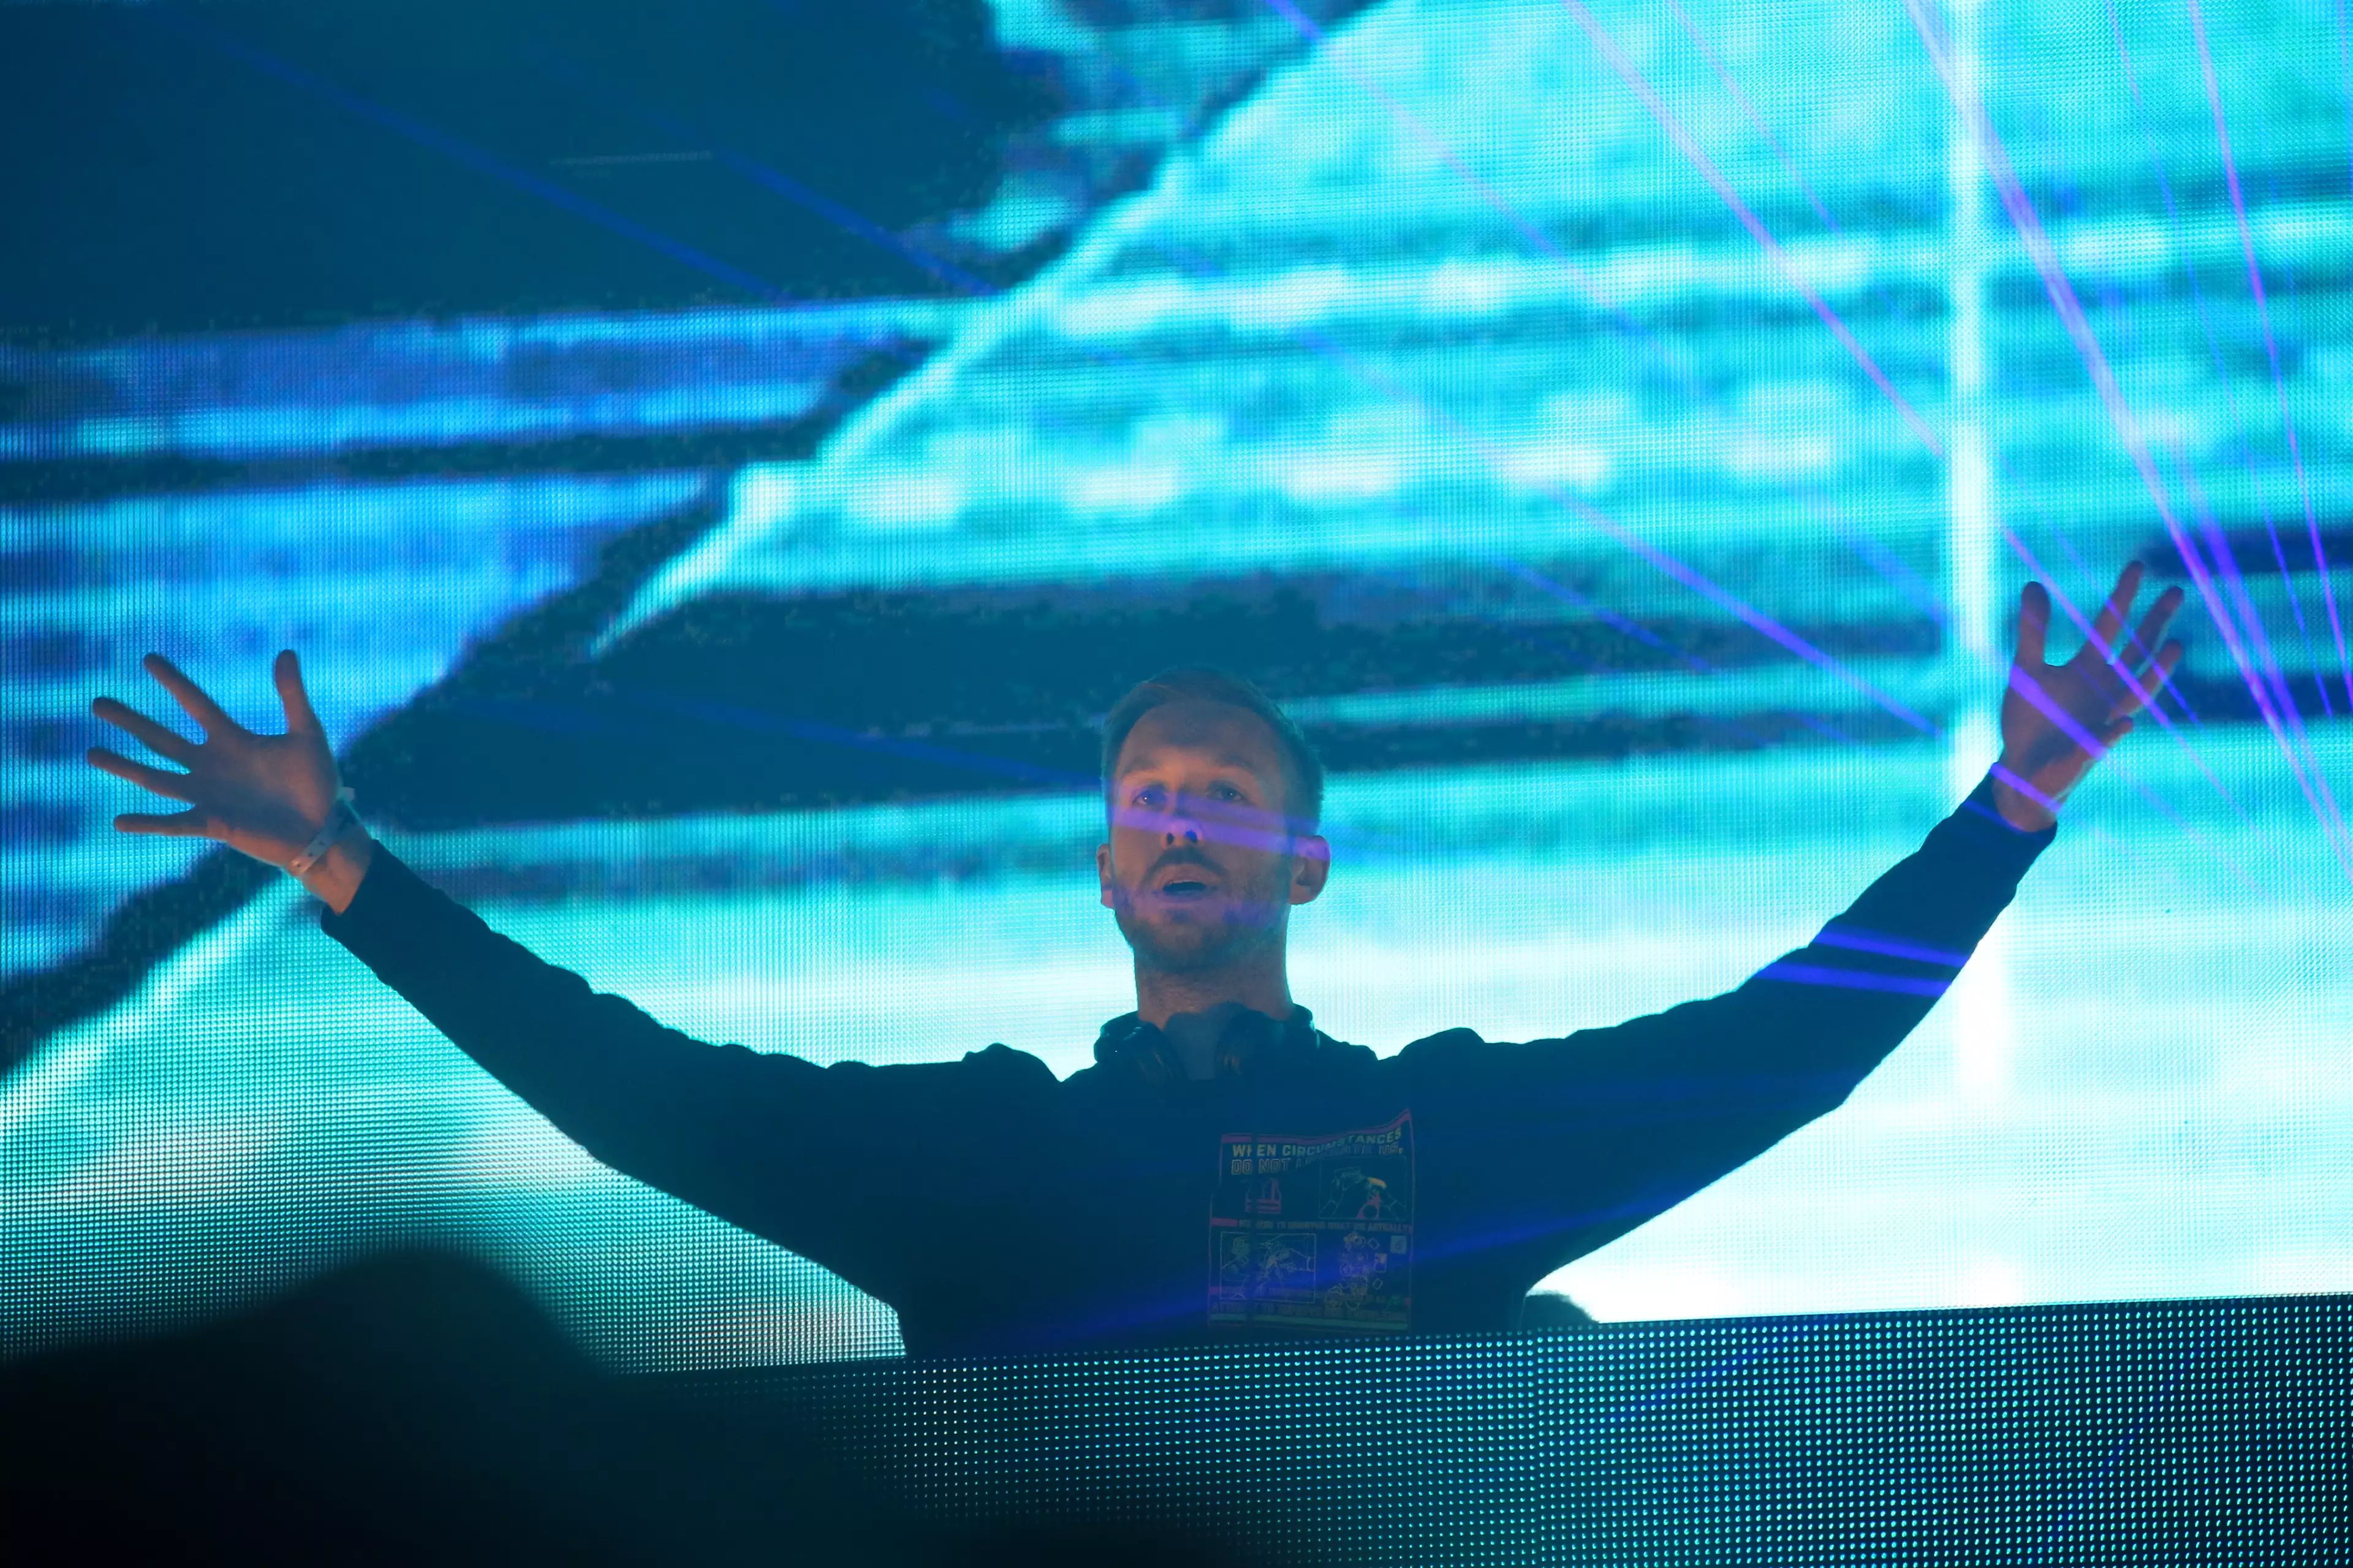 Festival X will be bringing the likes of Calvin Harris.